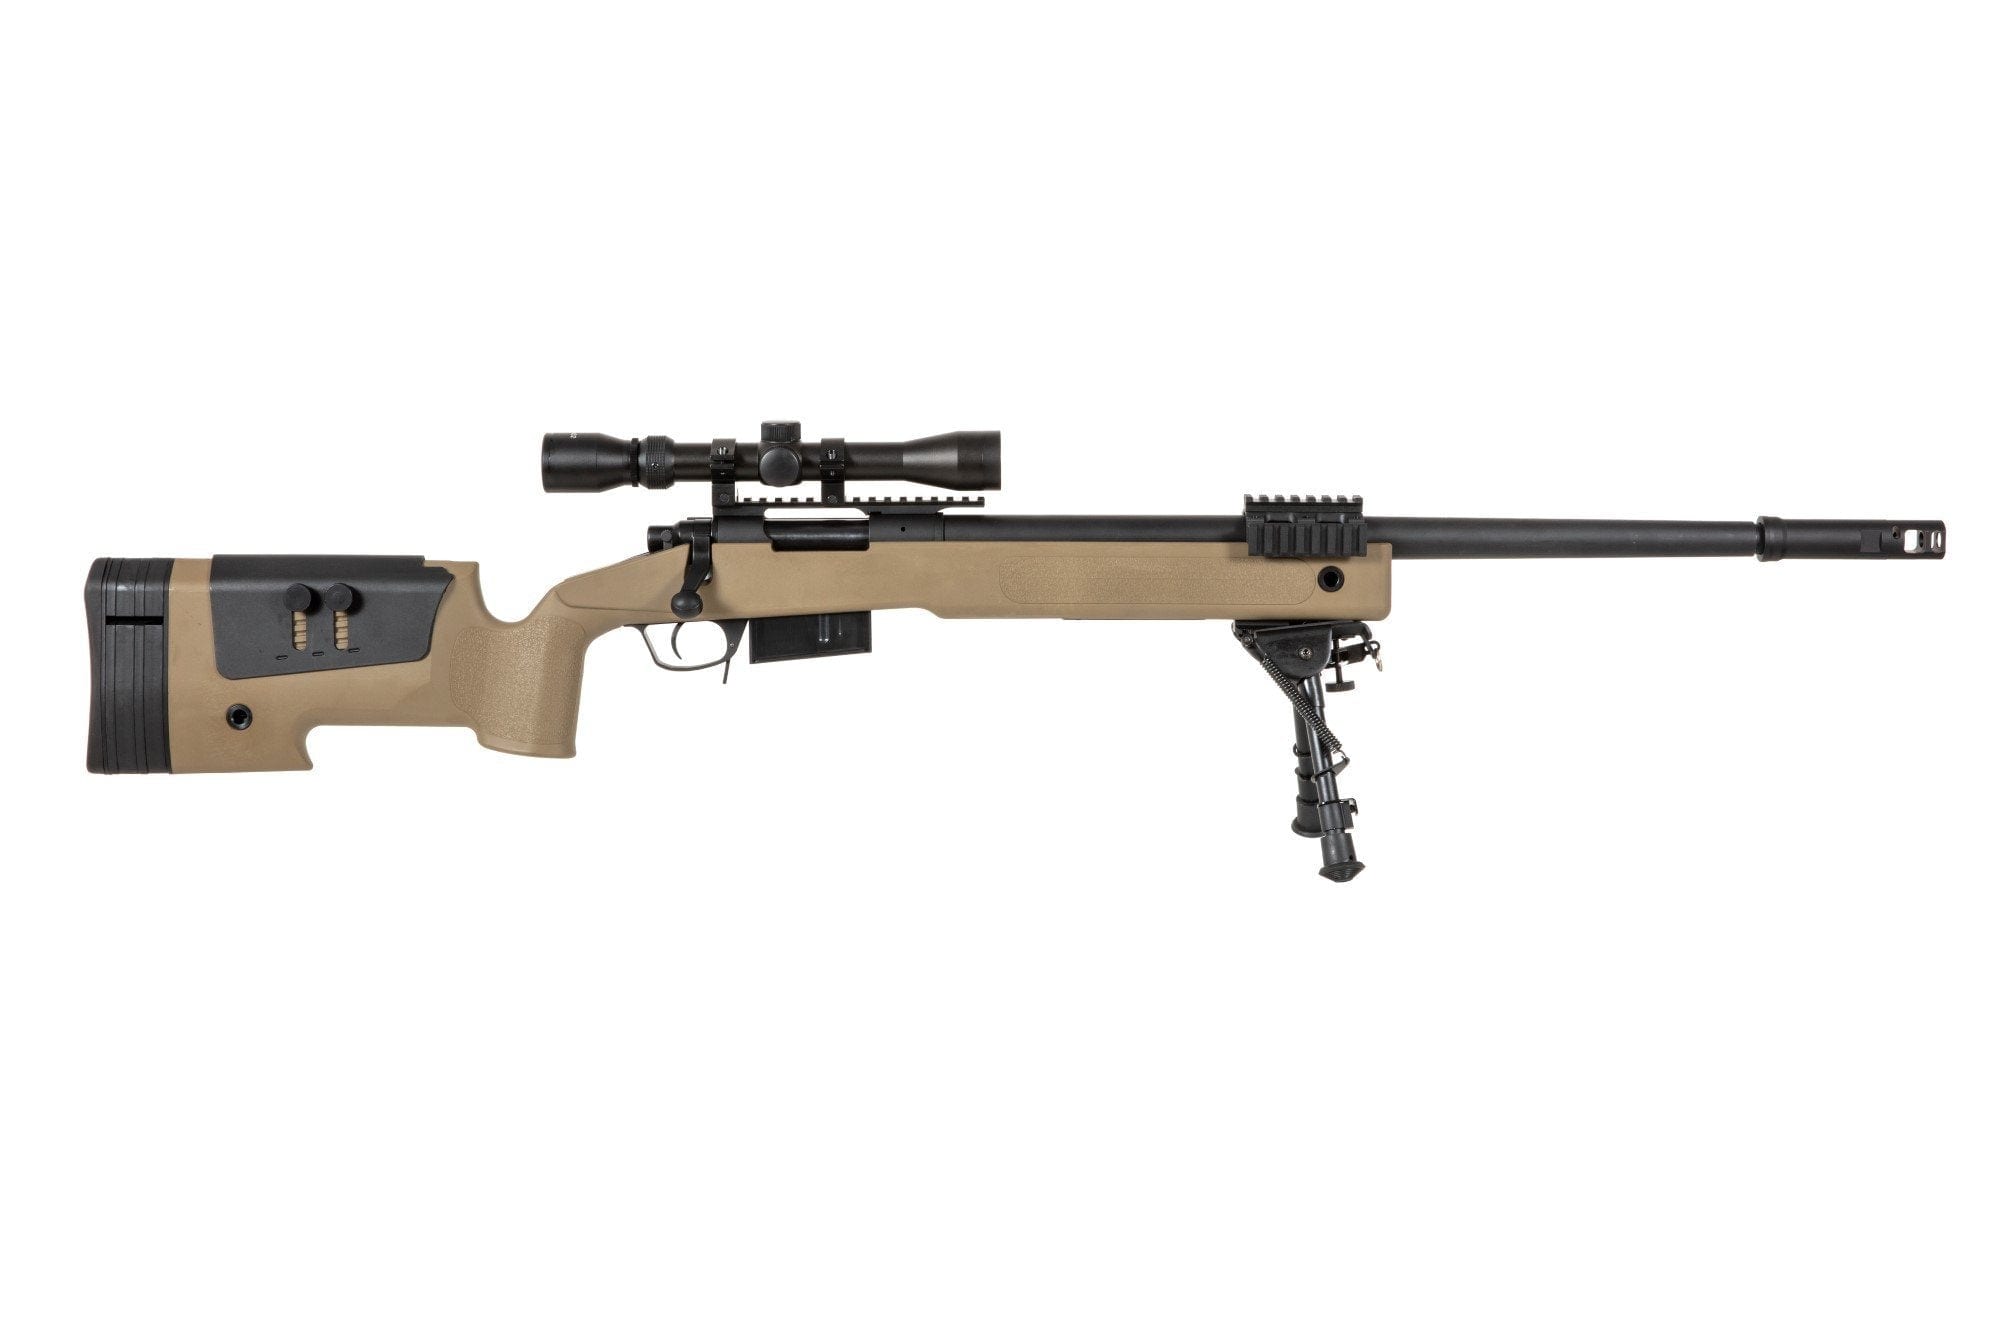 SA-CORE ™ S03 High Velocity Replica Sniper Rifle with Scope and Bipod - Tan by Specna Arms on Airsoft Mania Europe